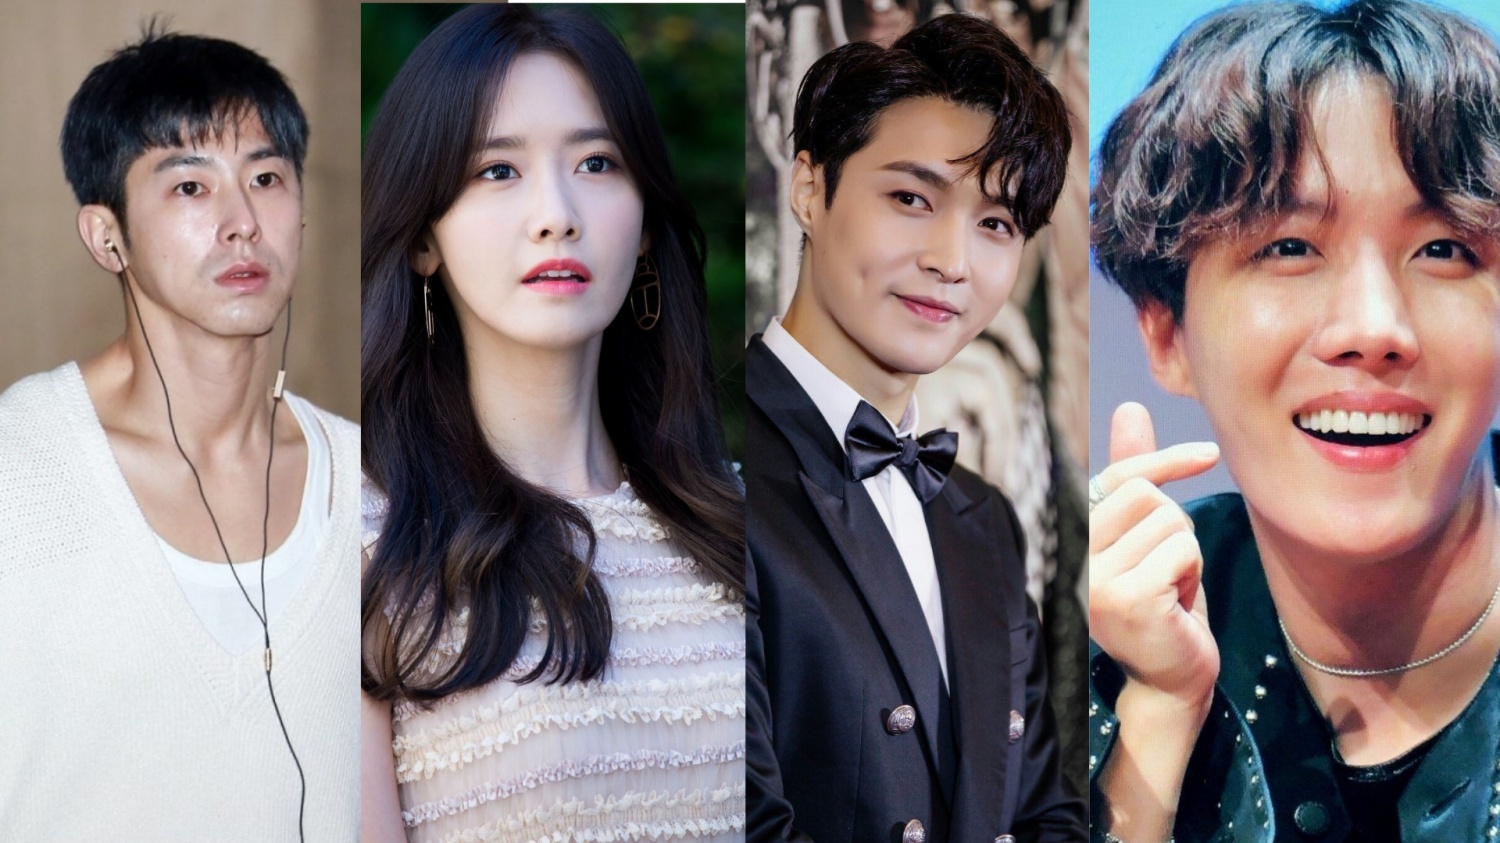 List of Korean Celebrities and Idols Who Extend Their Hands Amid the NCOV Outbreak